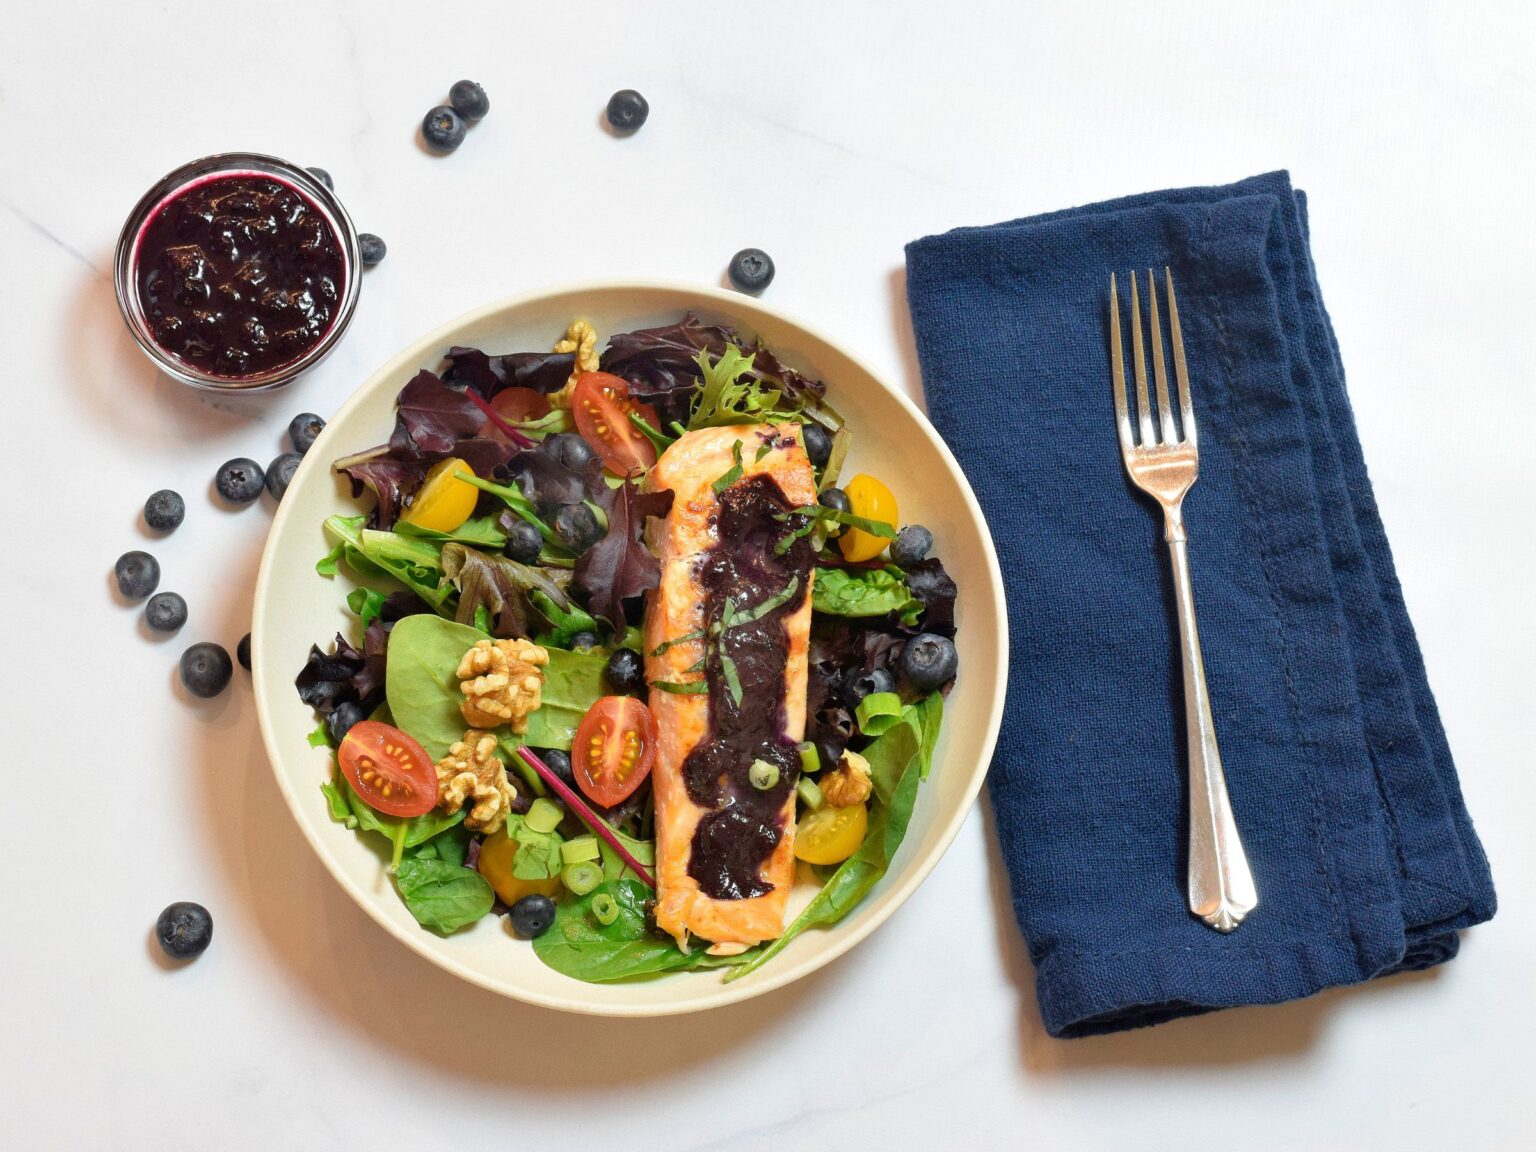 Salmon with Blueberry Basil Sauce